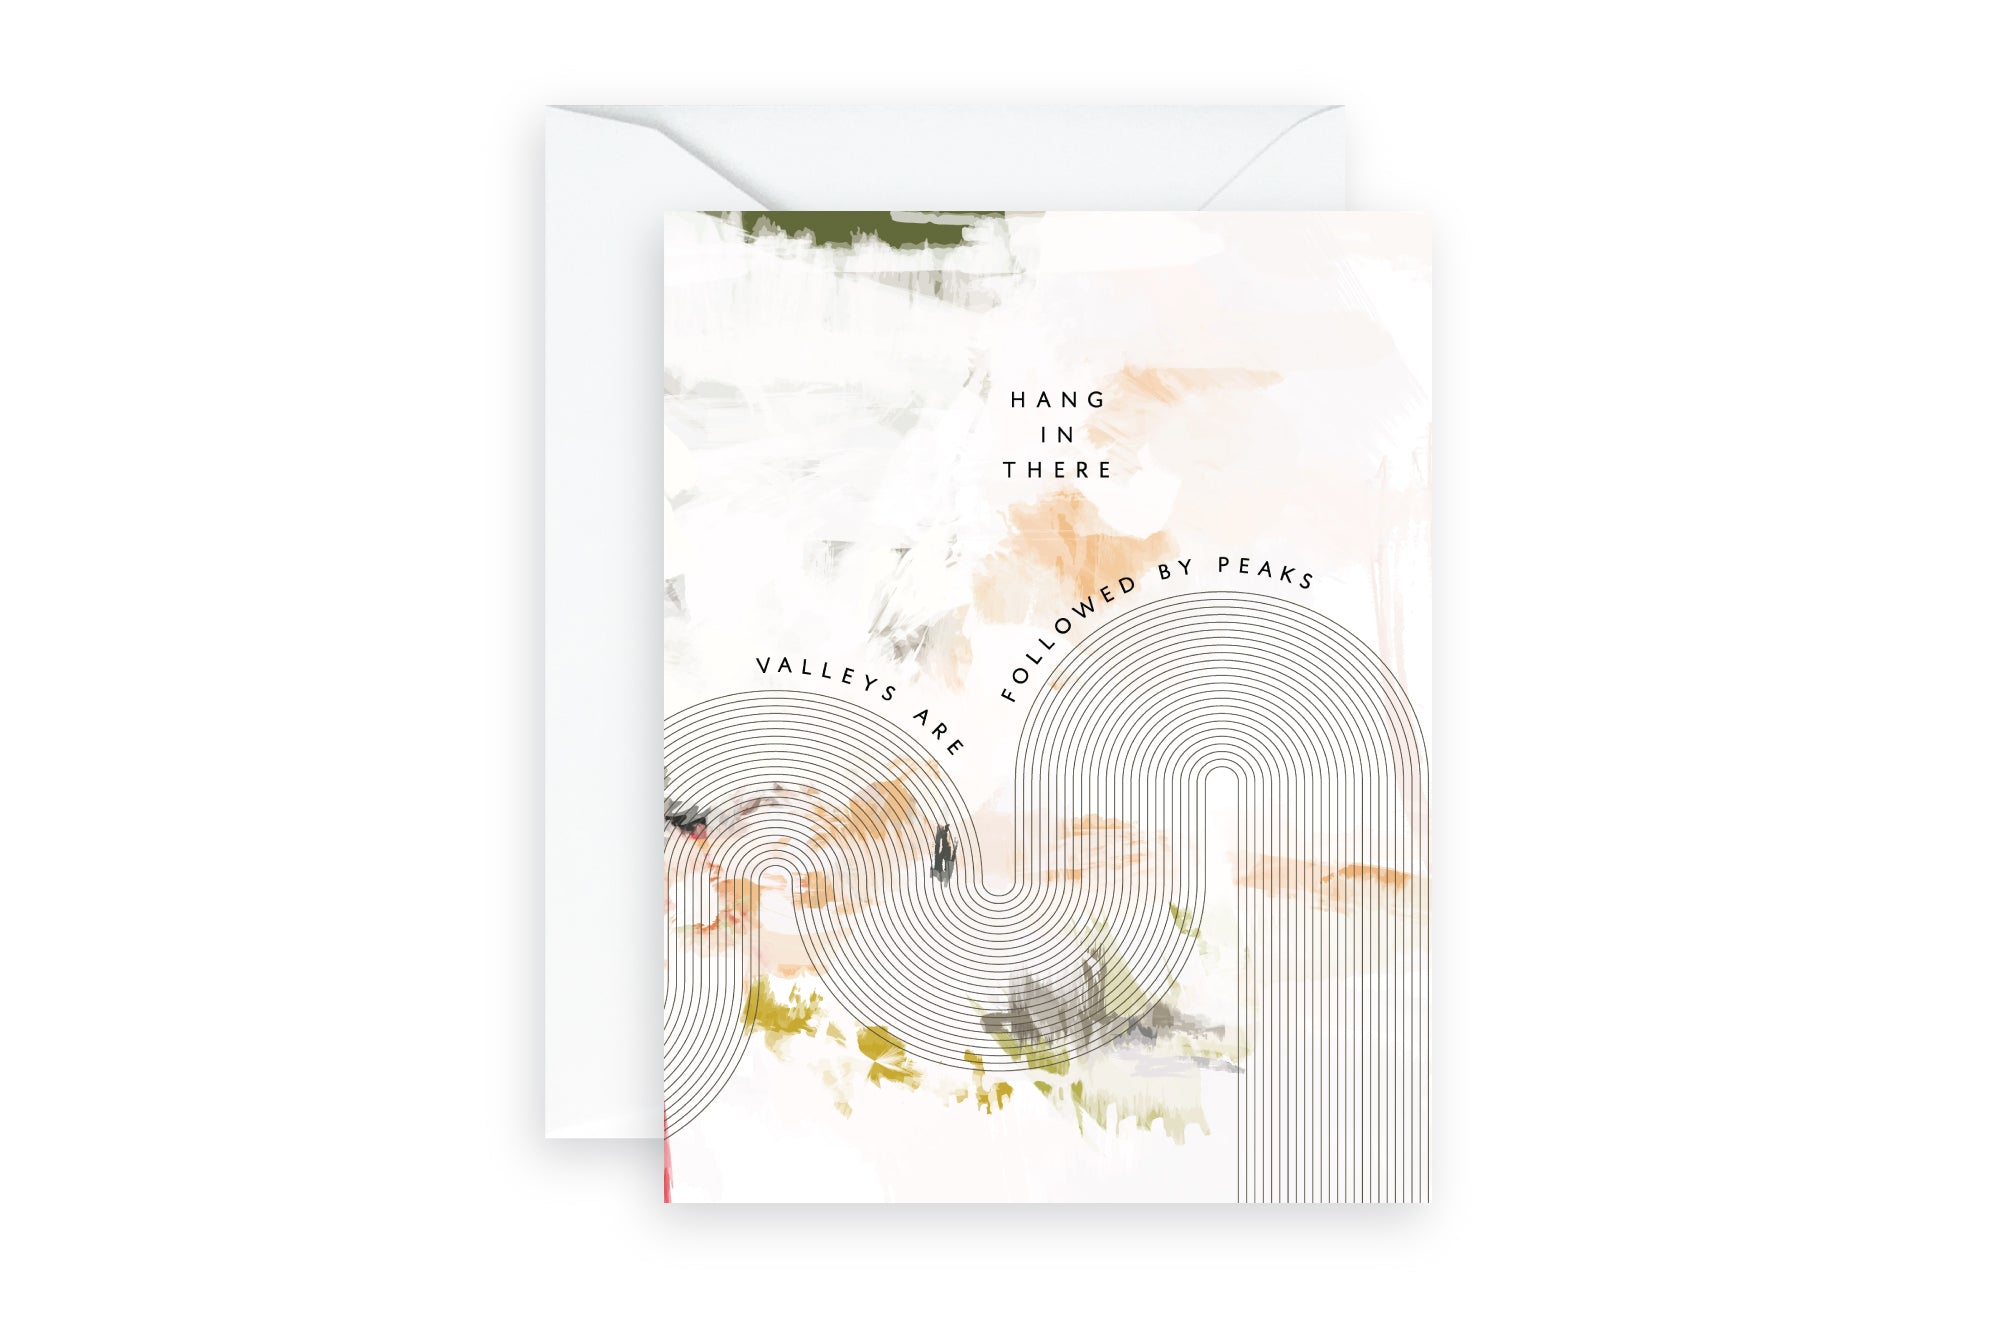 Hang in | Sympathy | Cheer Modern Abstract Greeting Card by pixelimpress